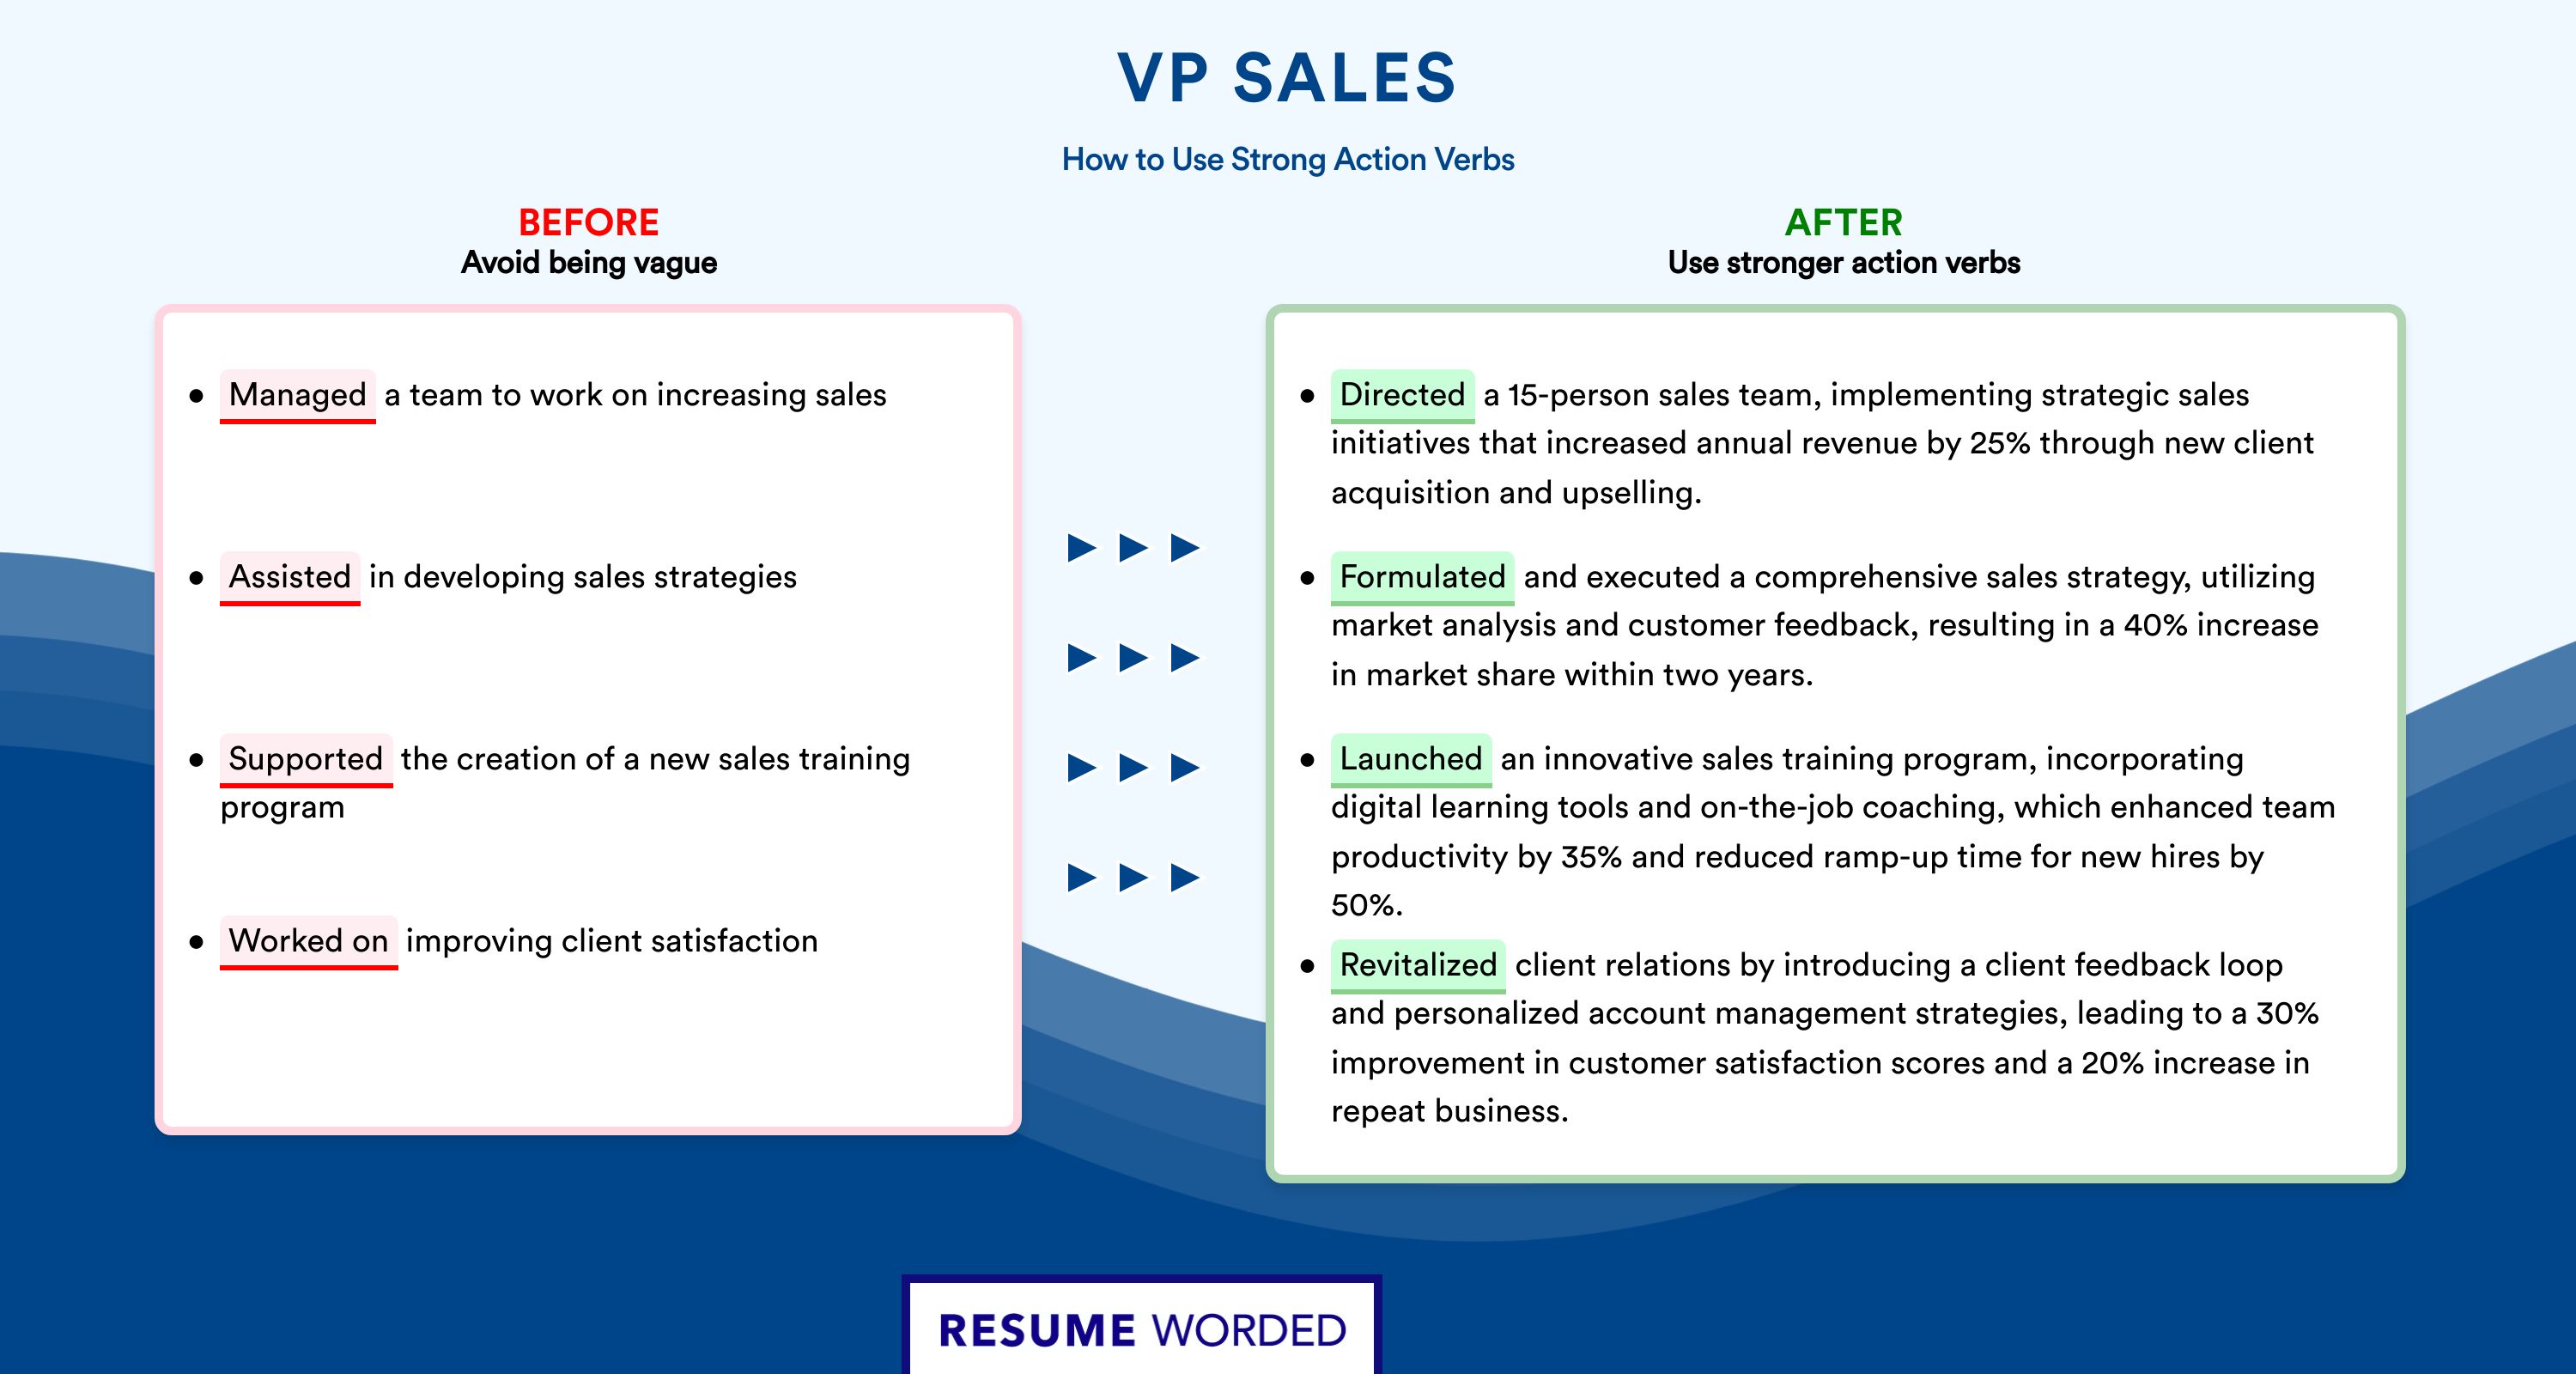 Action Verbs for VP Sales